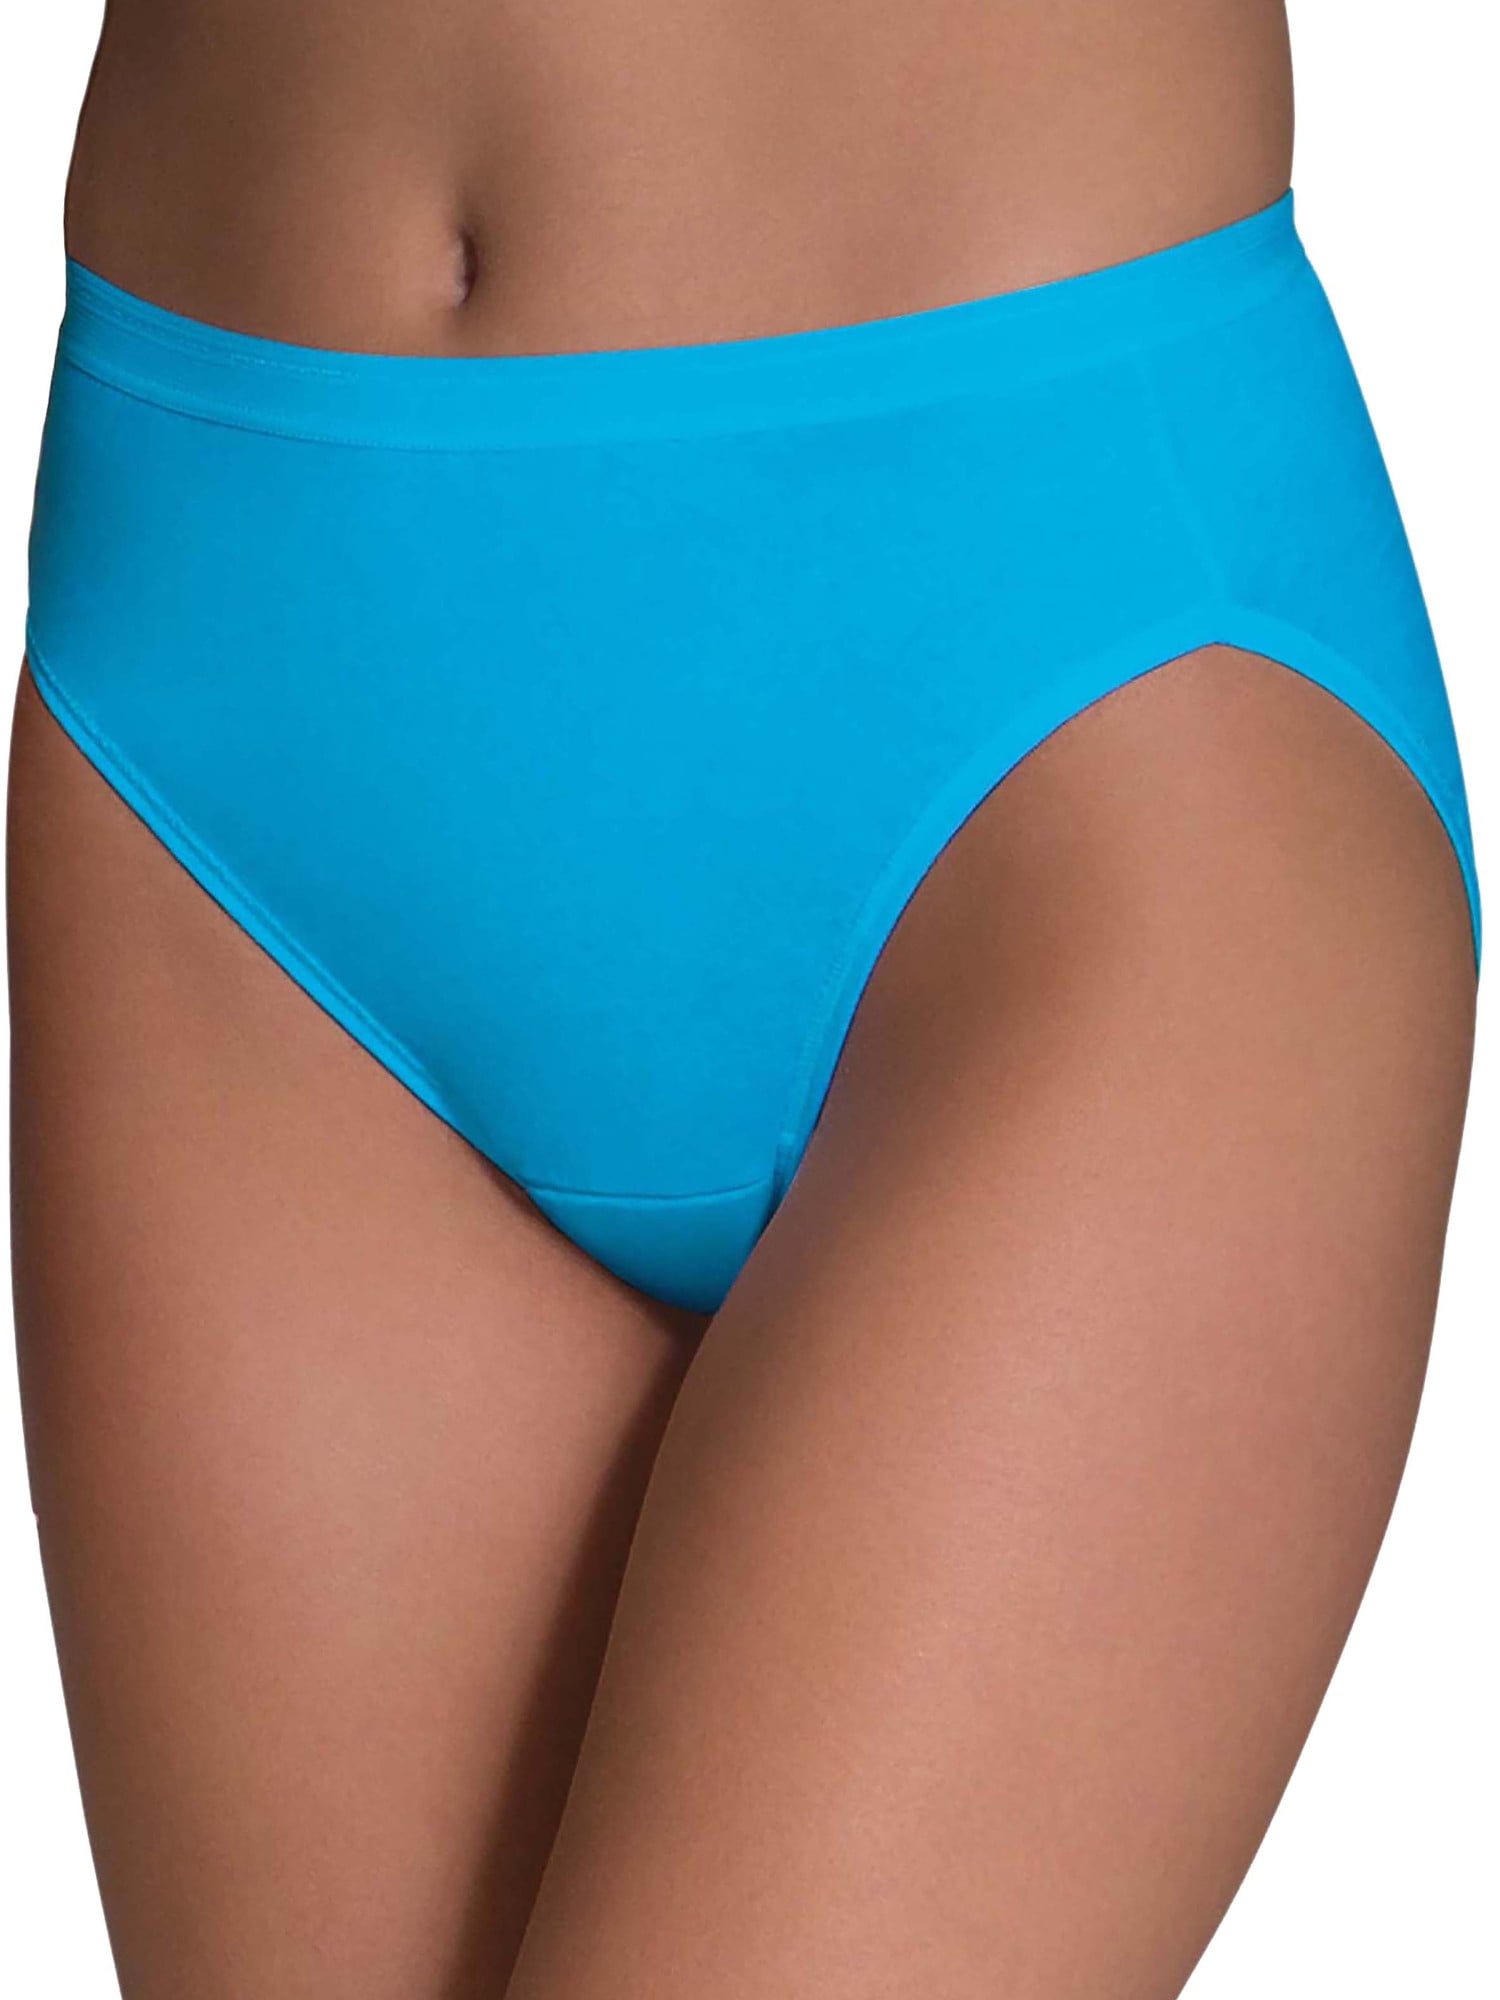 Details about   Fruit of the Loom Women's Underwear Cotton Stretch Panties Hi Cut Hipster .. 